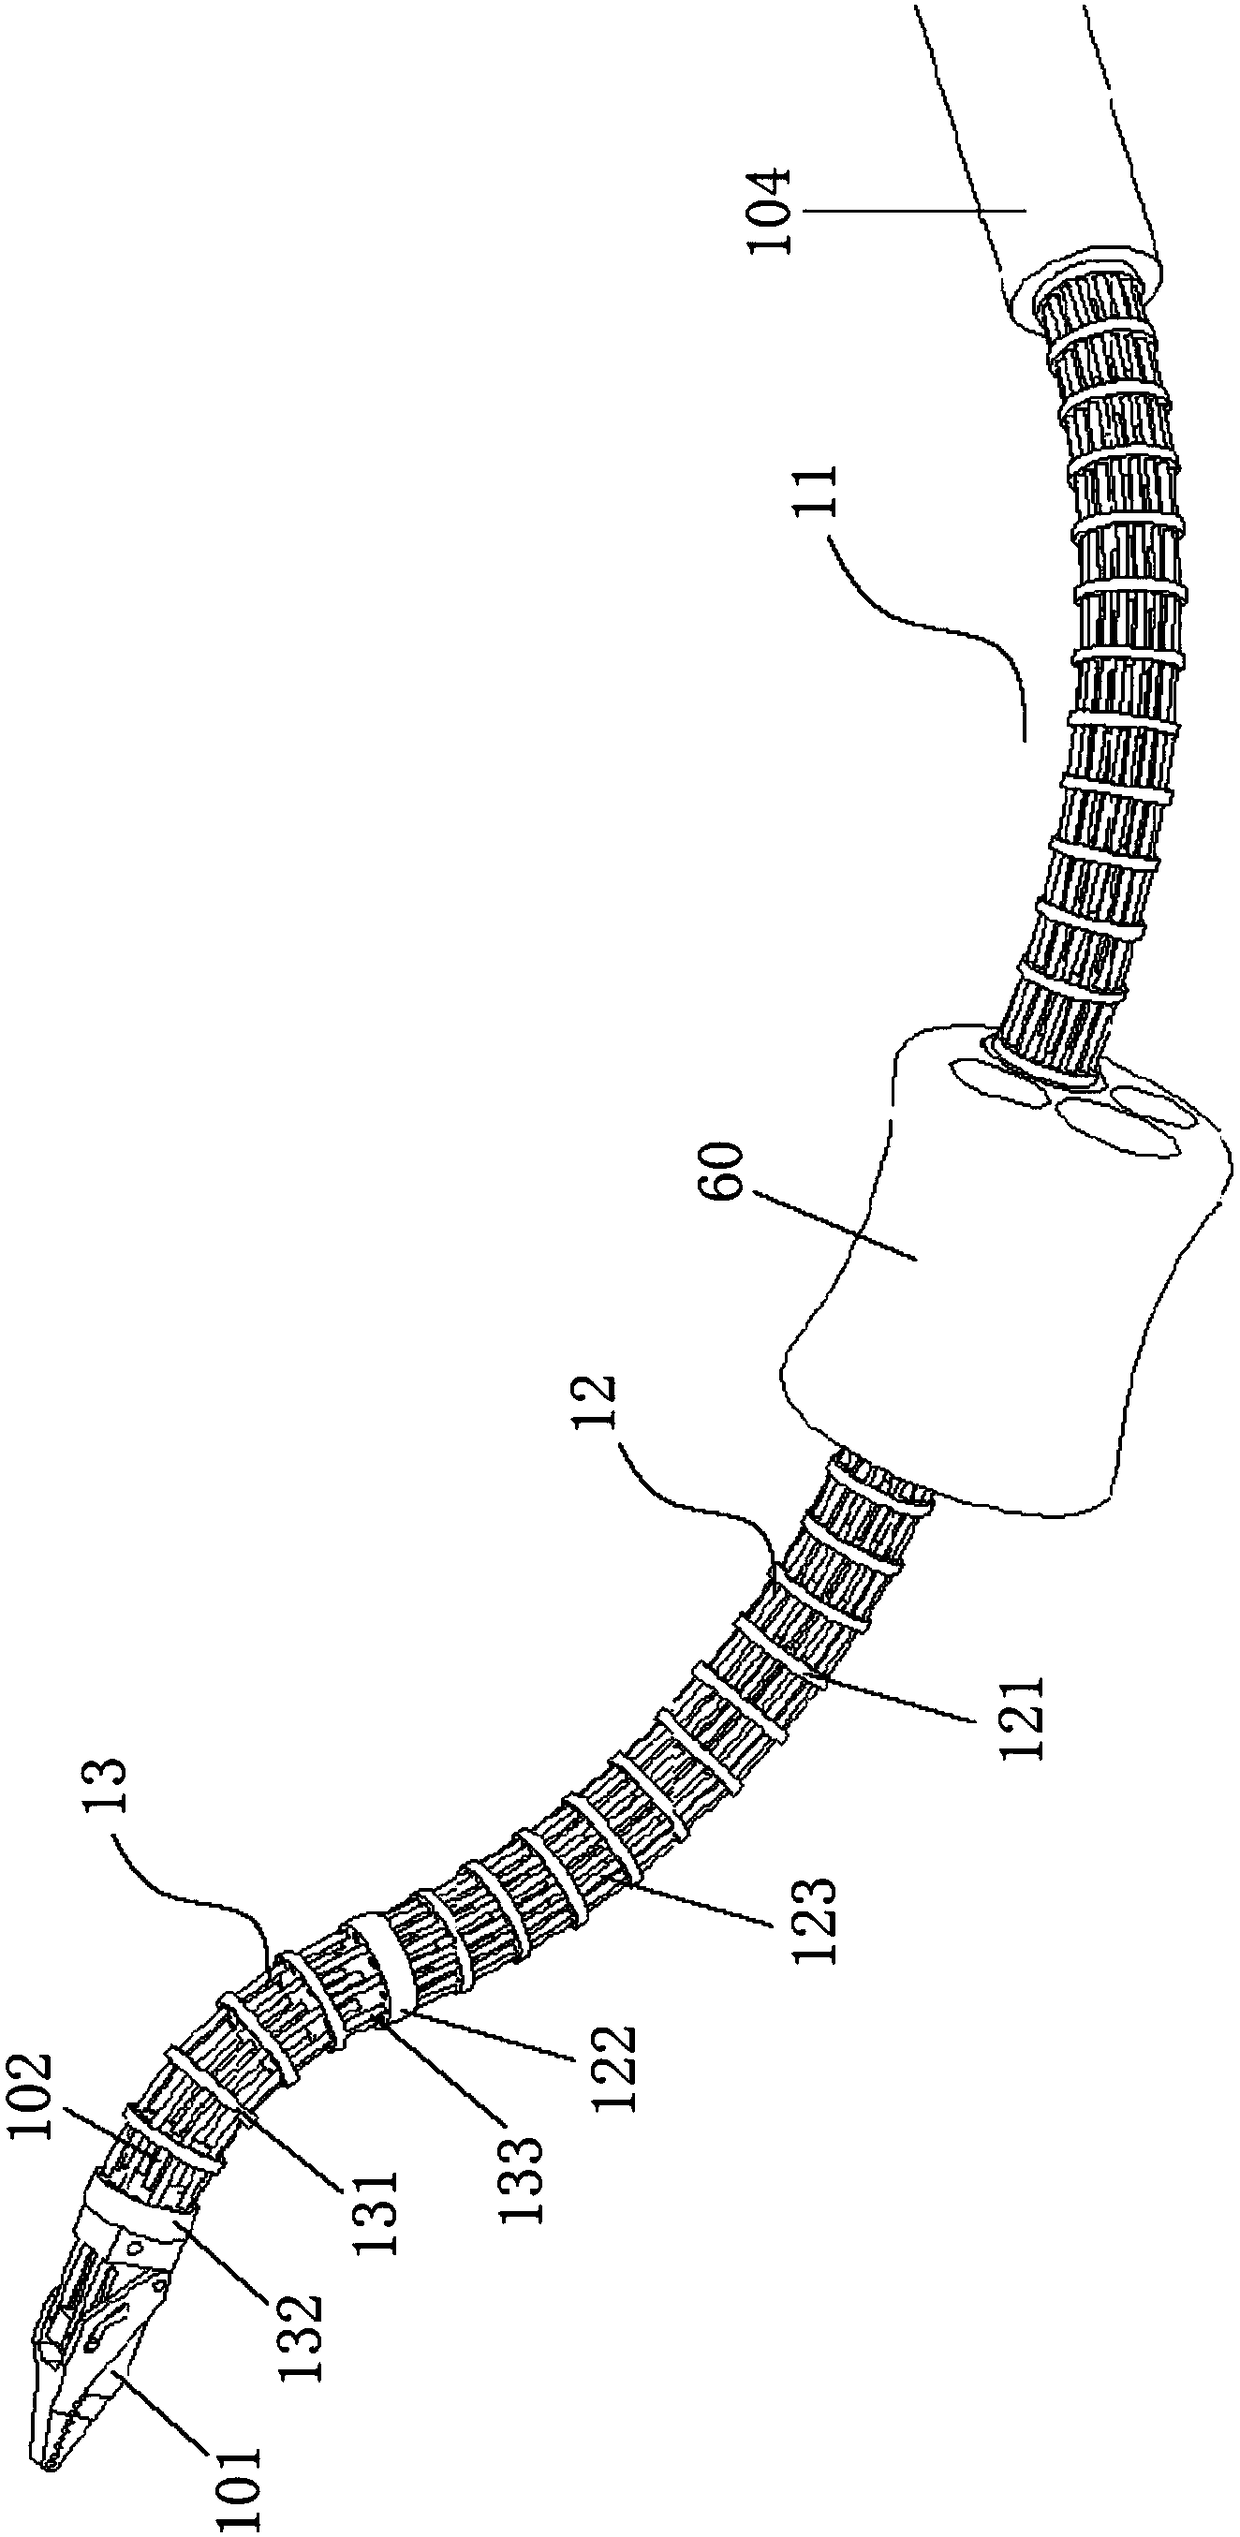 A flexible surgical tool system using structural bone